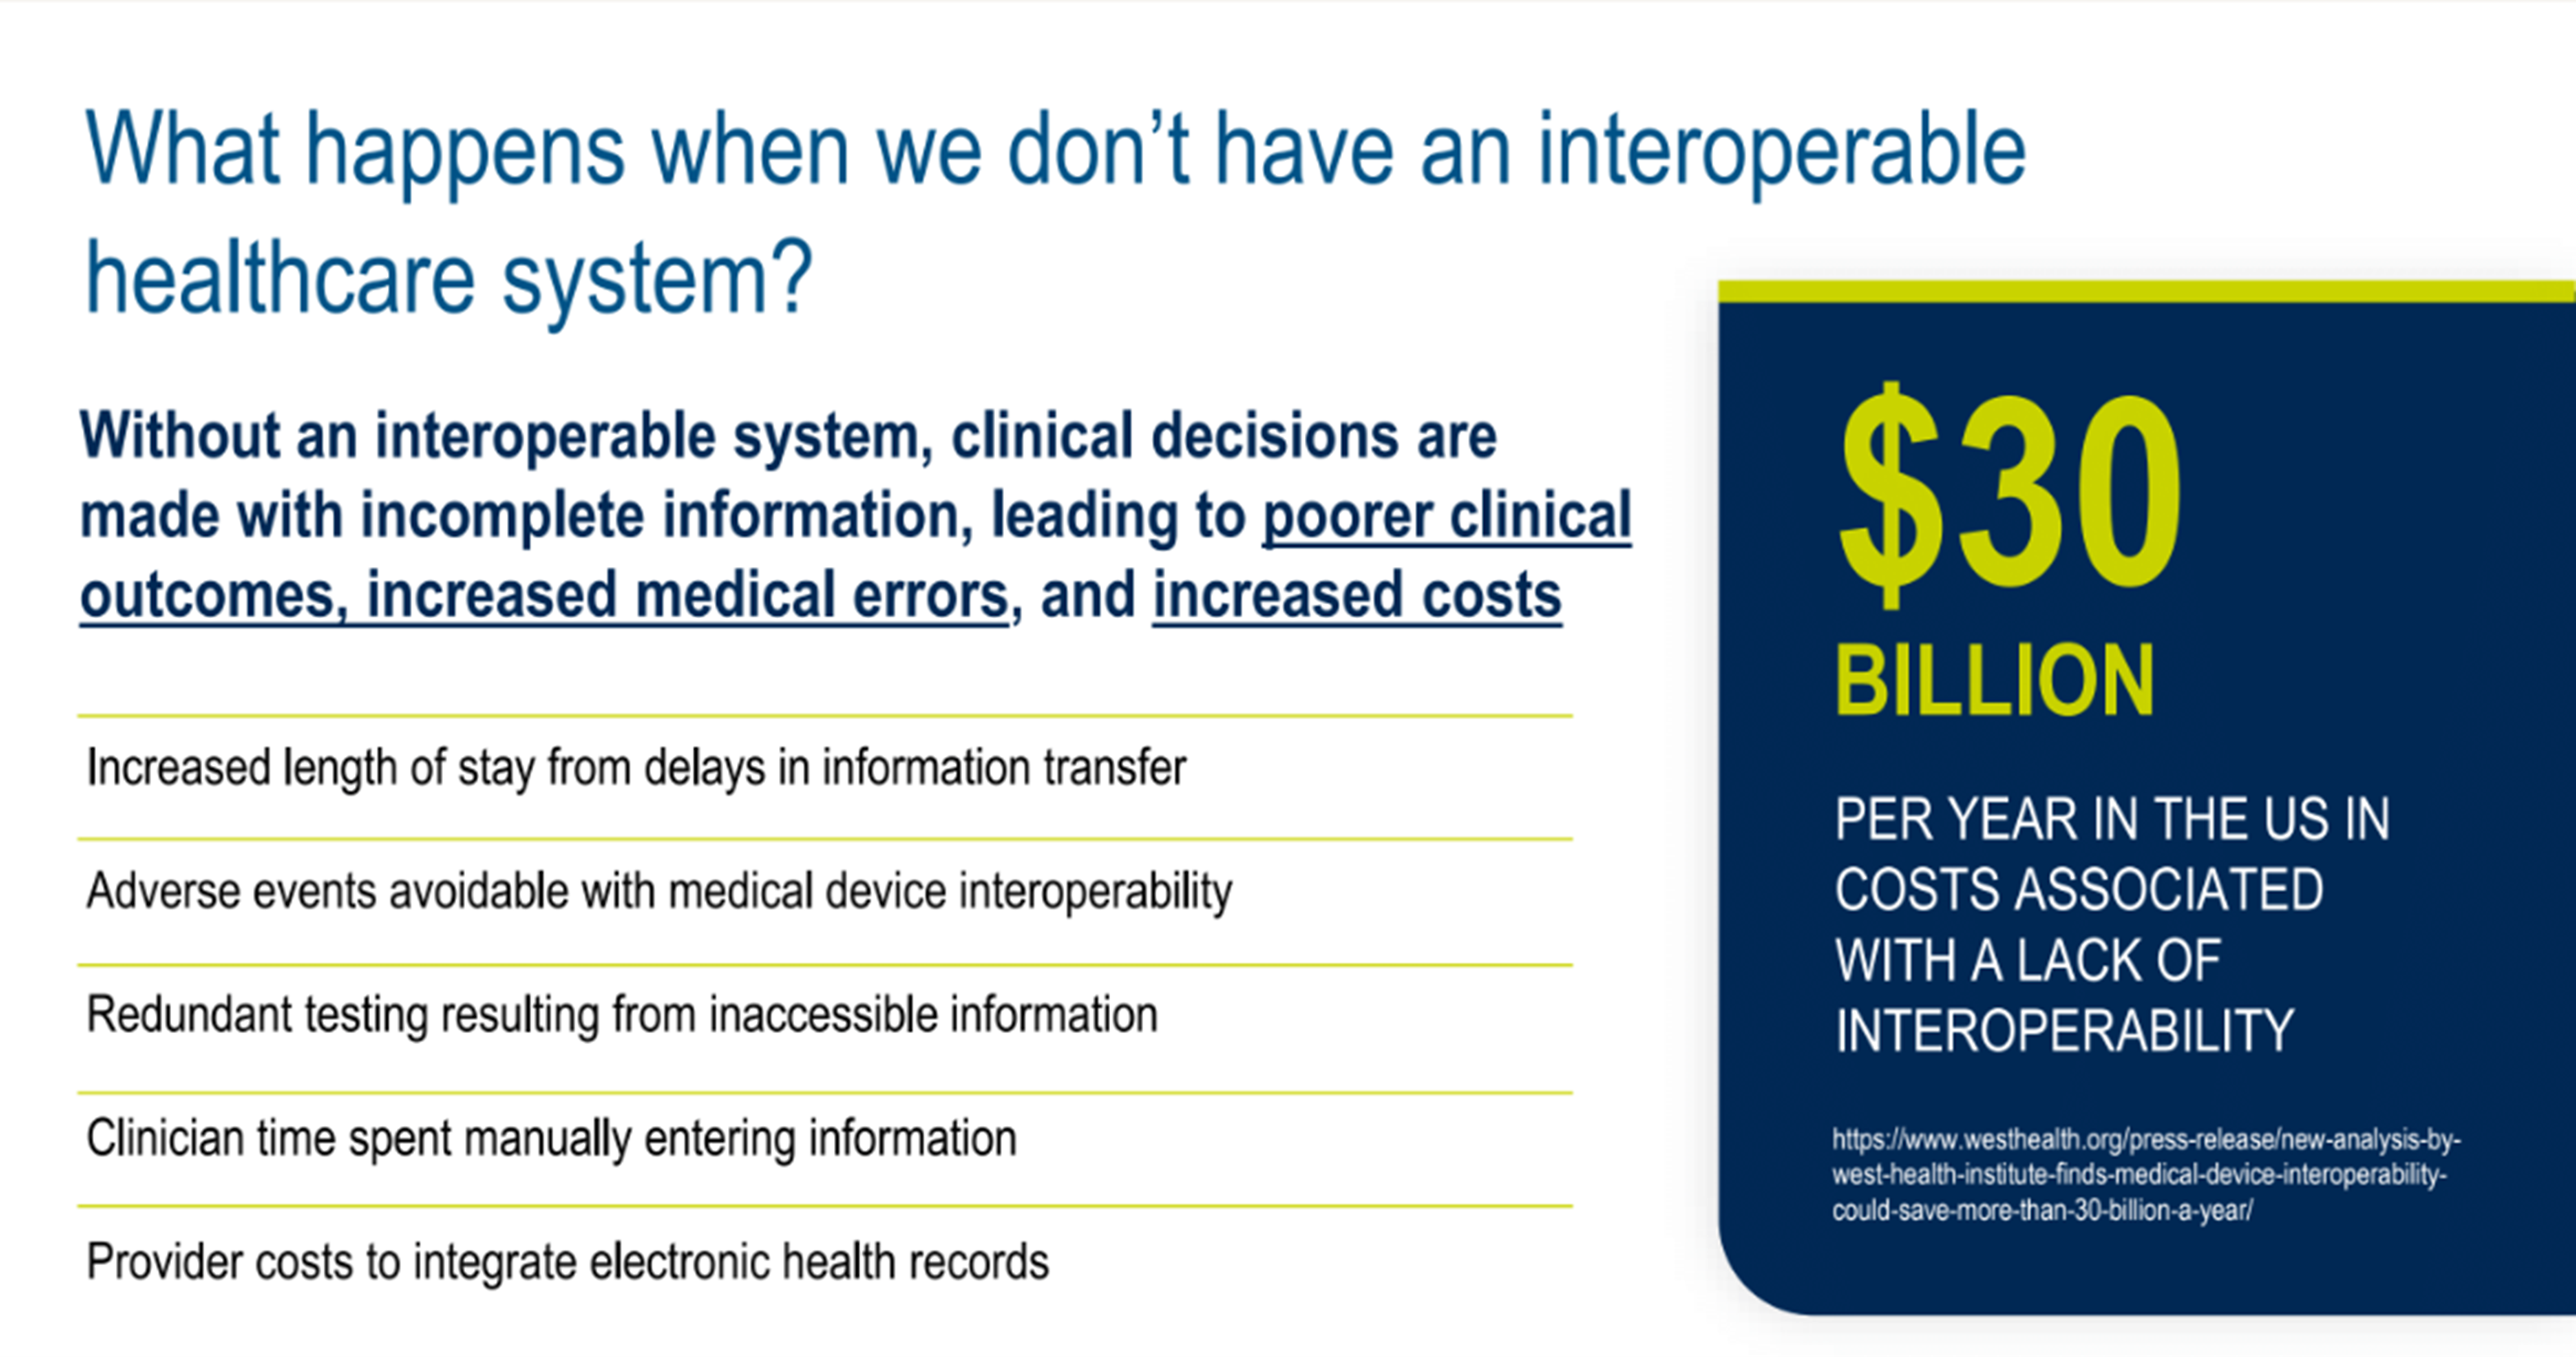 What Happens When we Don’t Have an Interoperable Healthcare System?